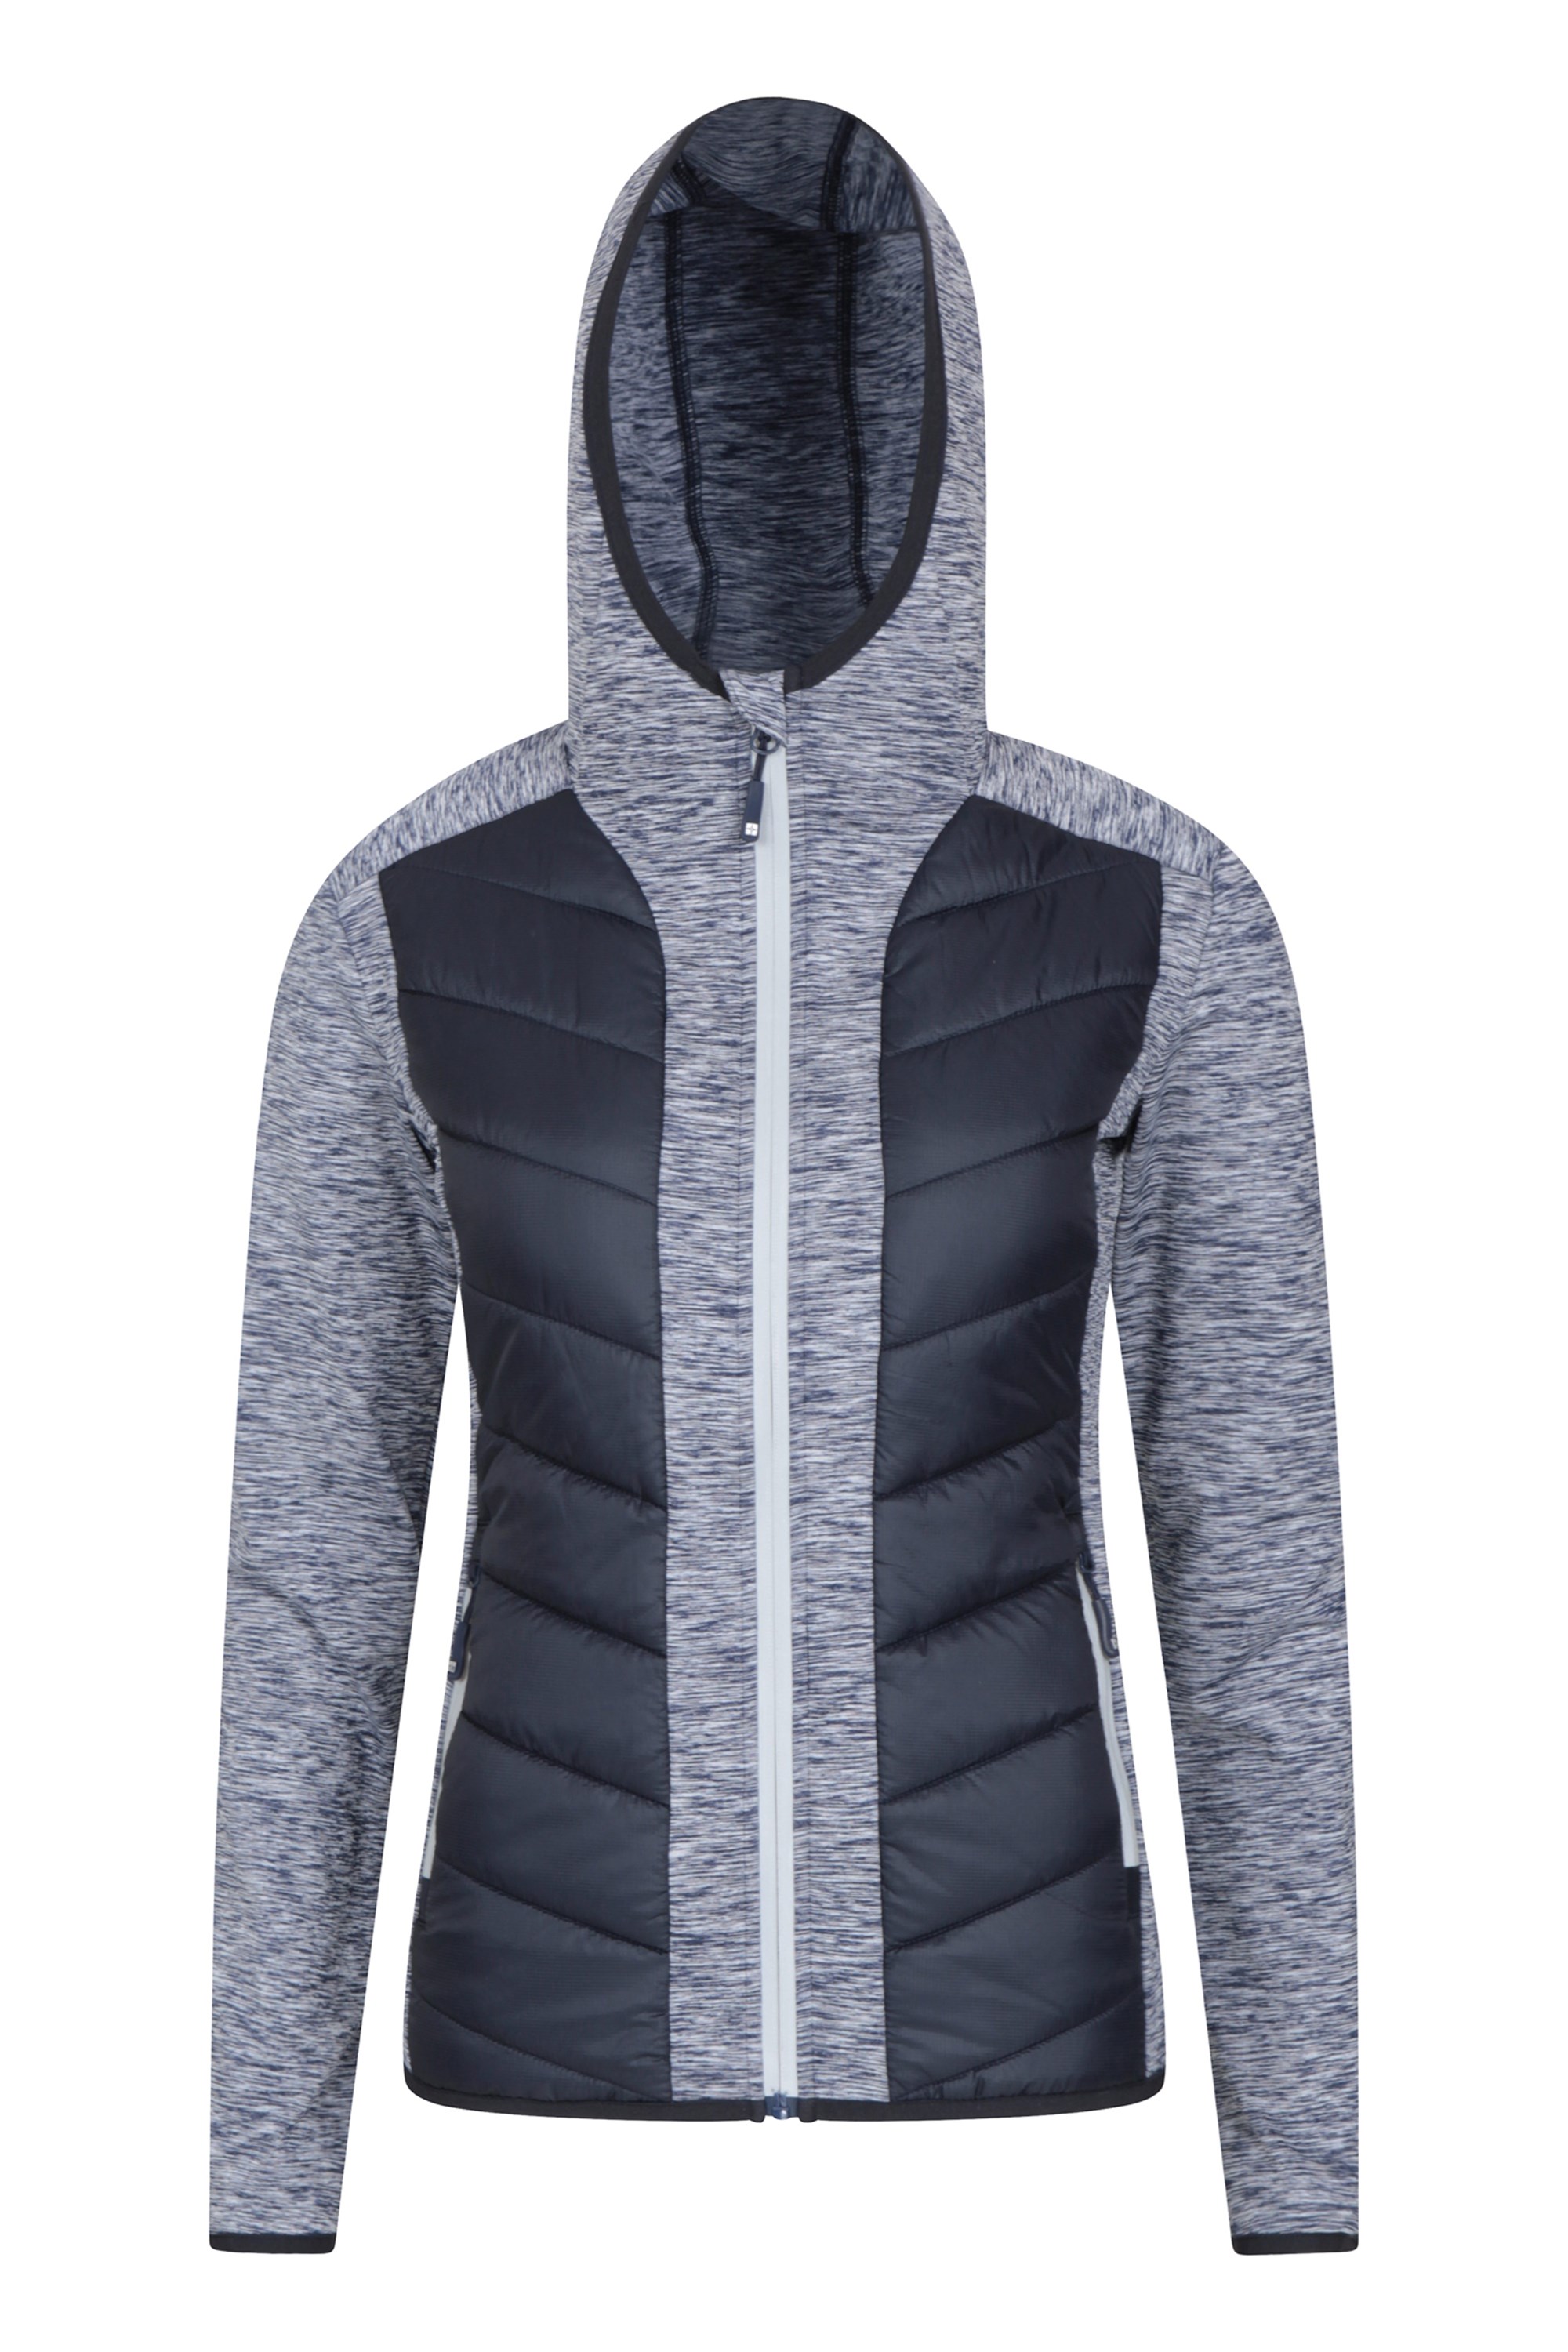 Get Going Womens Padded Jacket - Navy